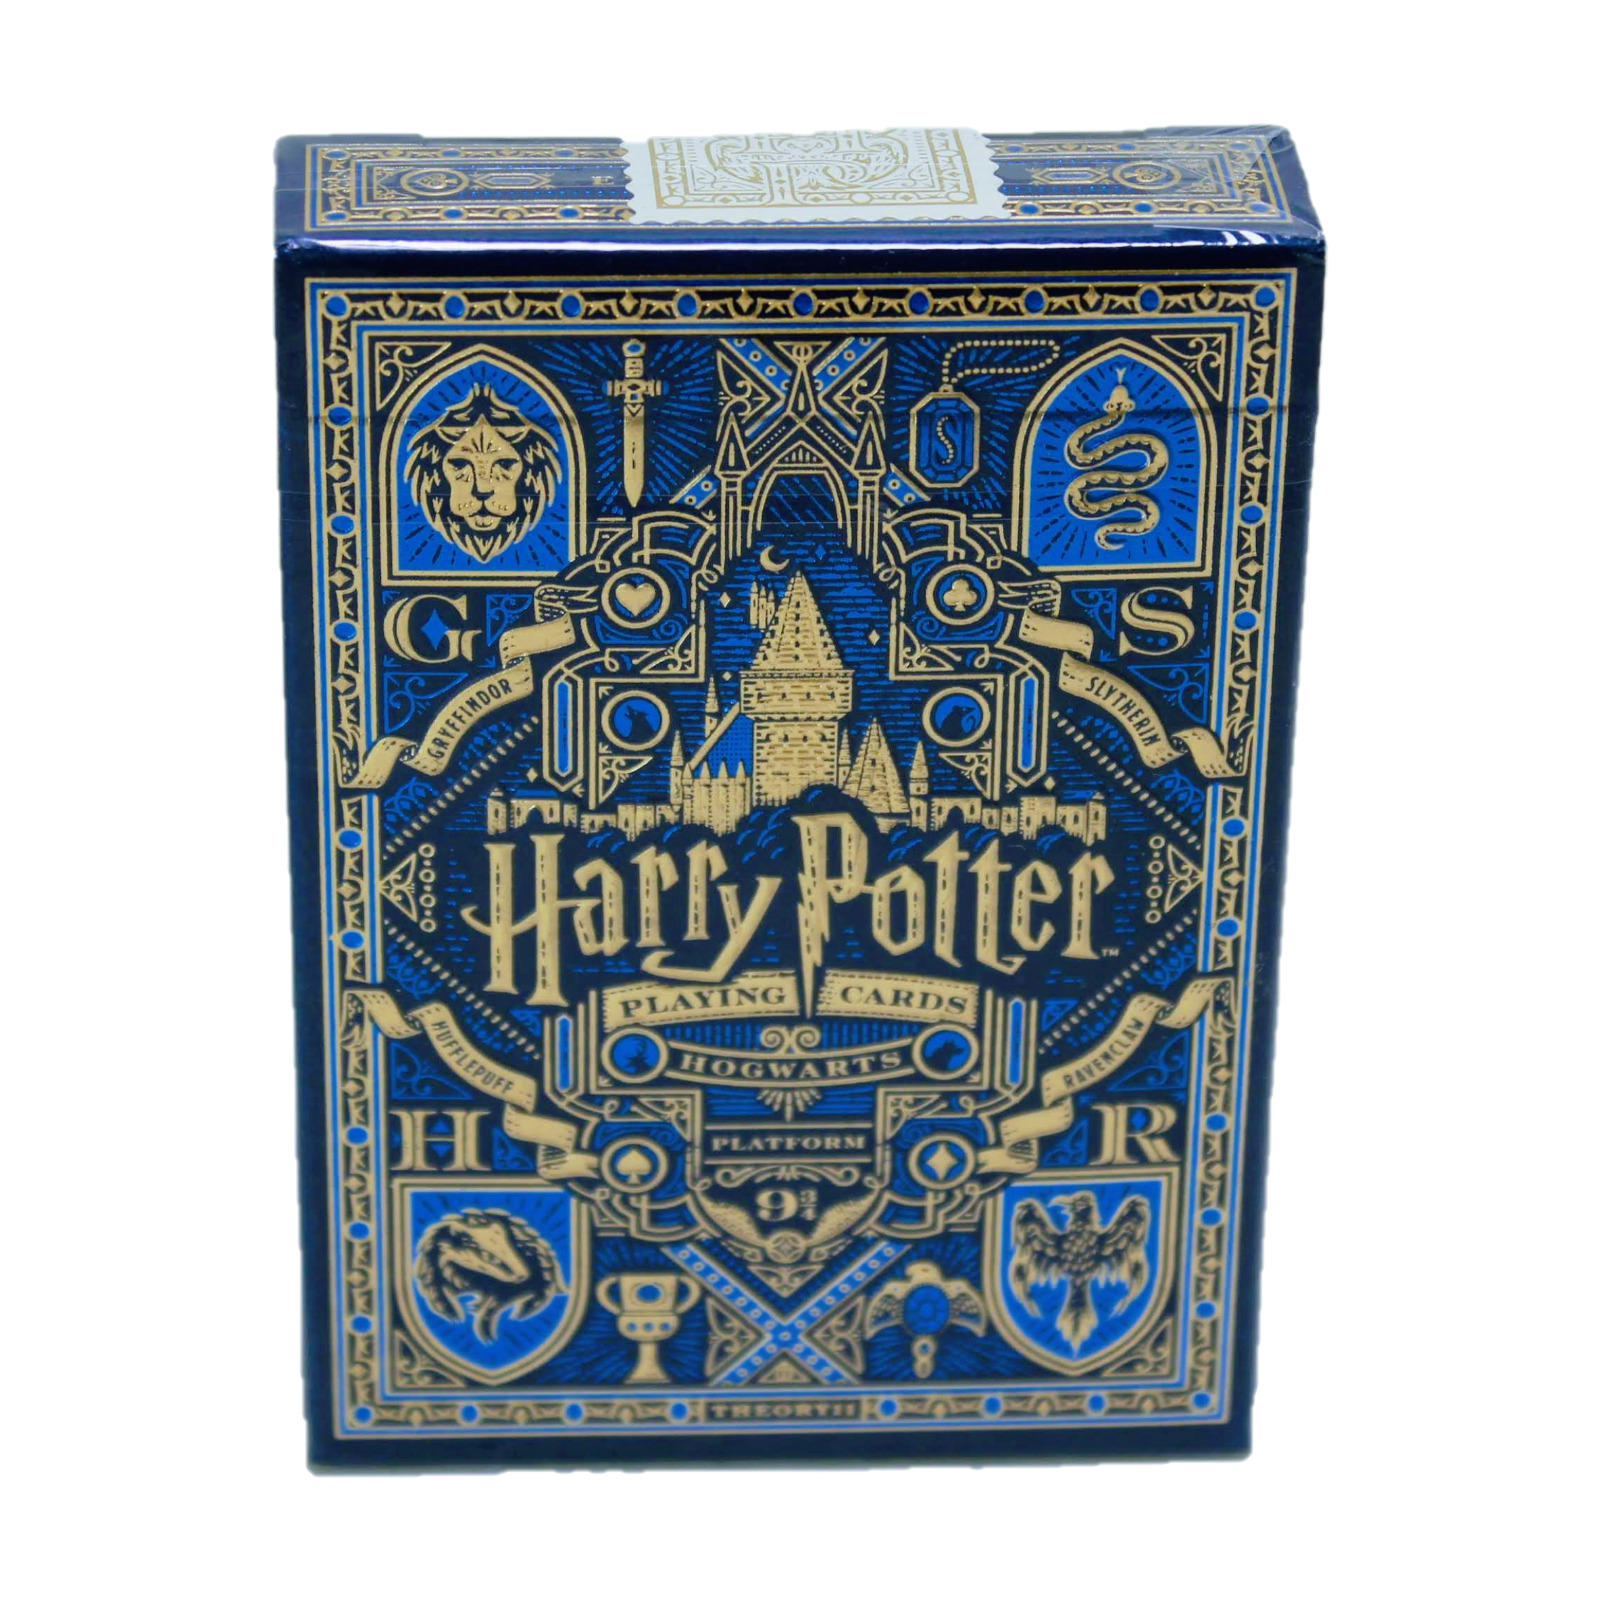 Theory11 Harry Potter Ravenclaw - High Quality Playing Cards Poker Size Deck